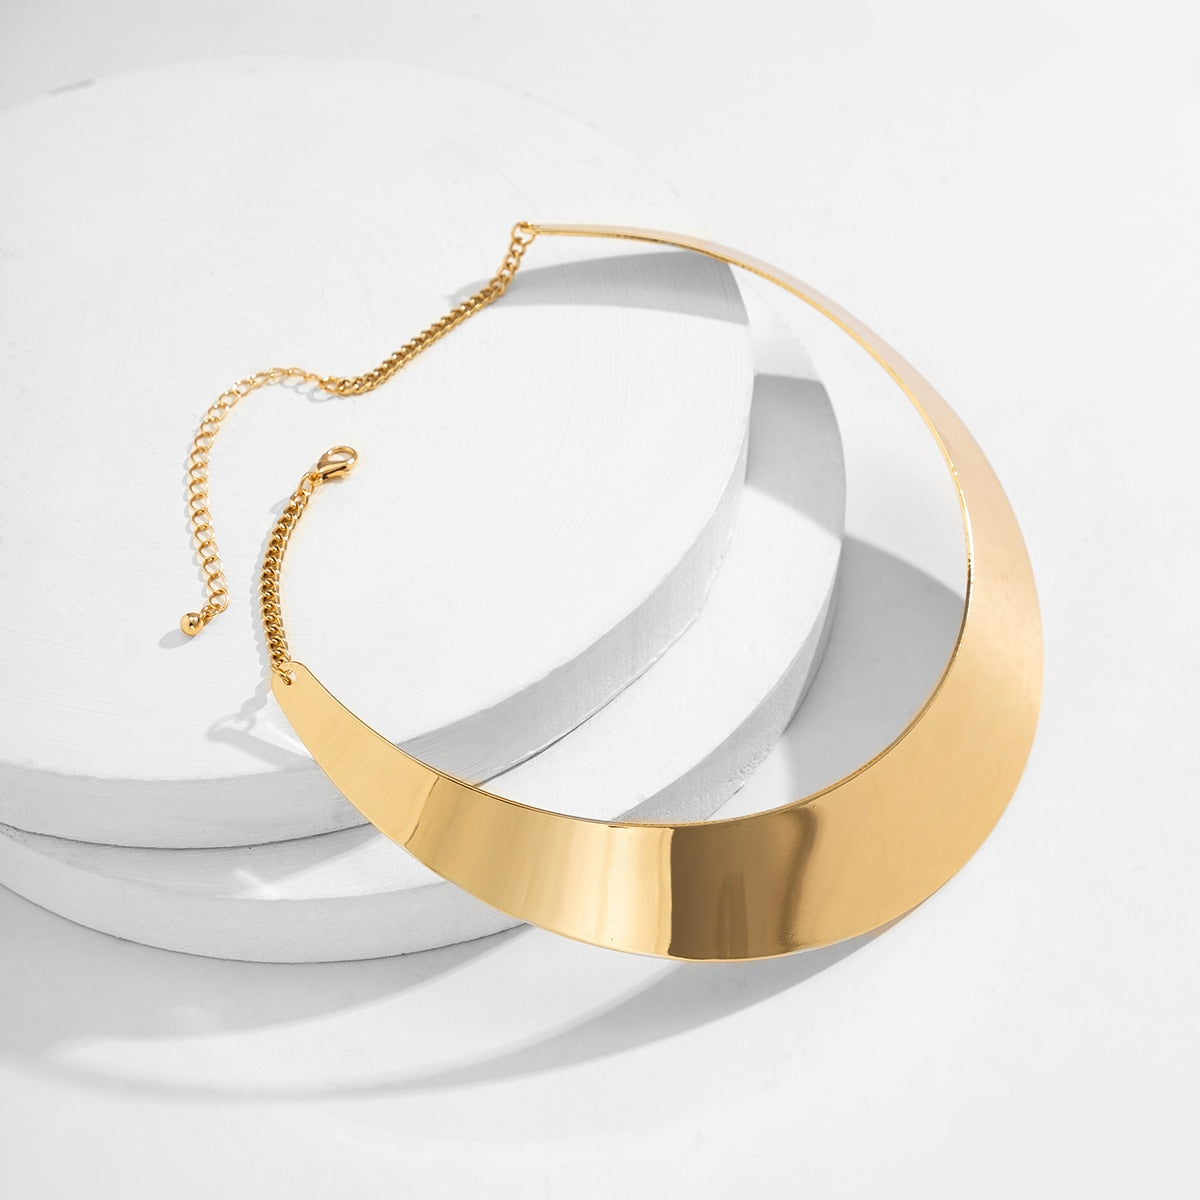 The Heloise Necklace